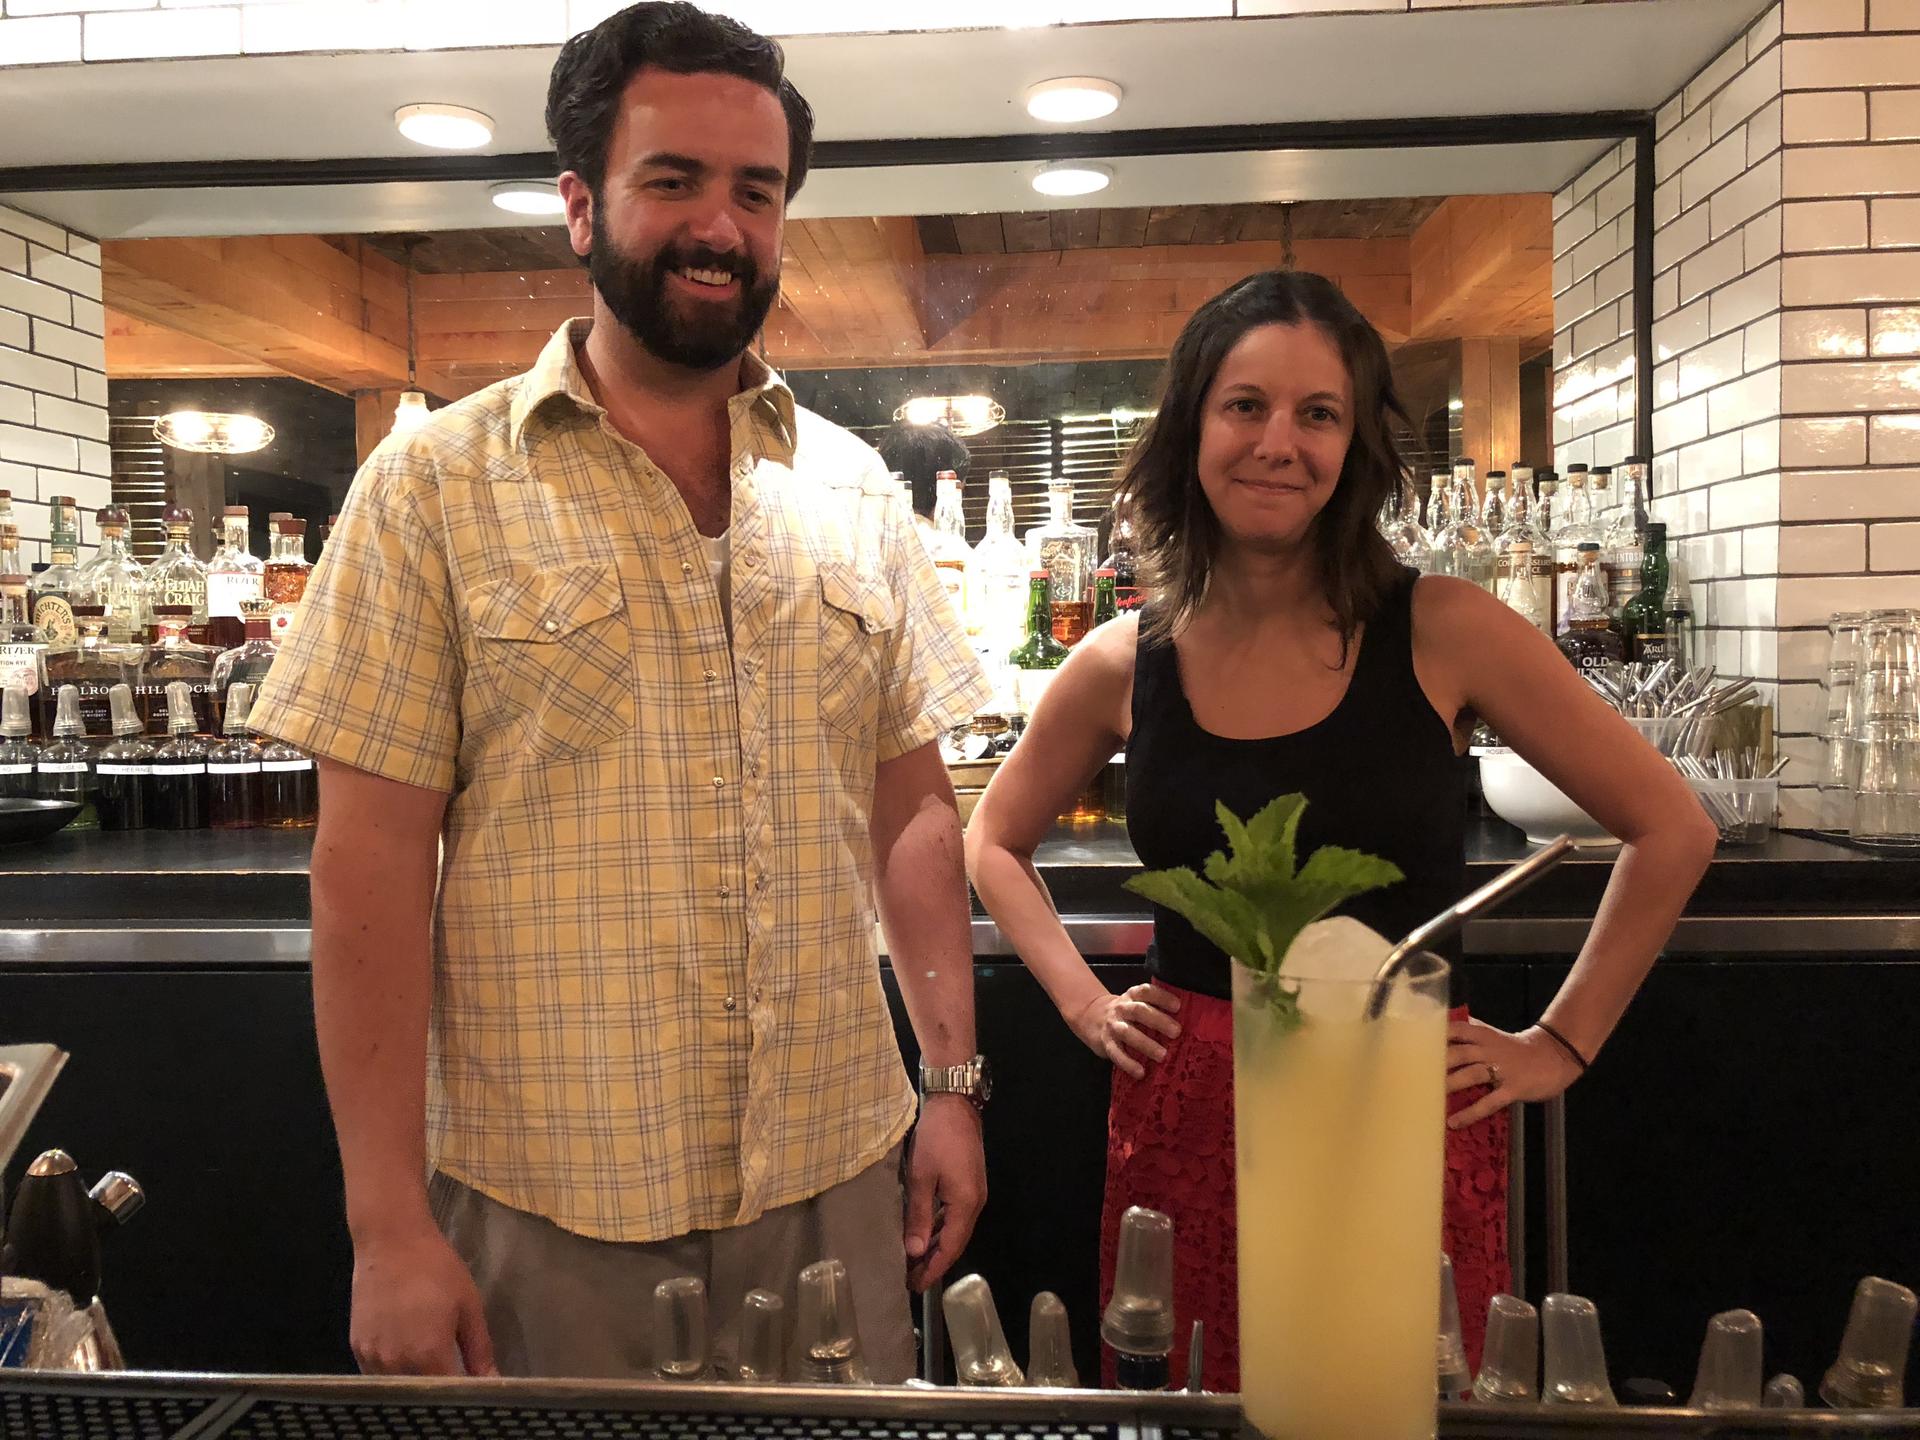 Stainless steel straws are now served with cocktails at Alden & Harlow in Cambridge, Massachusetts. Daniel Pontius and Jen Fields say the reusable straws will save the restaurant some money, but the primary motivation to switch was helping the environment